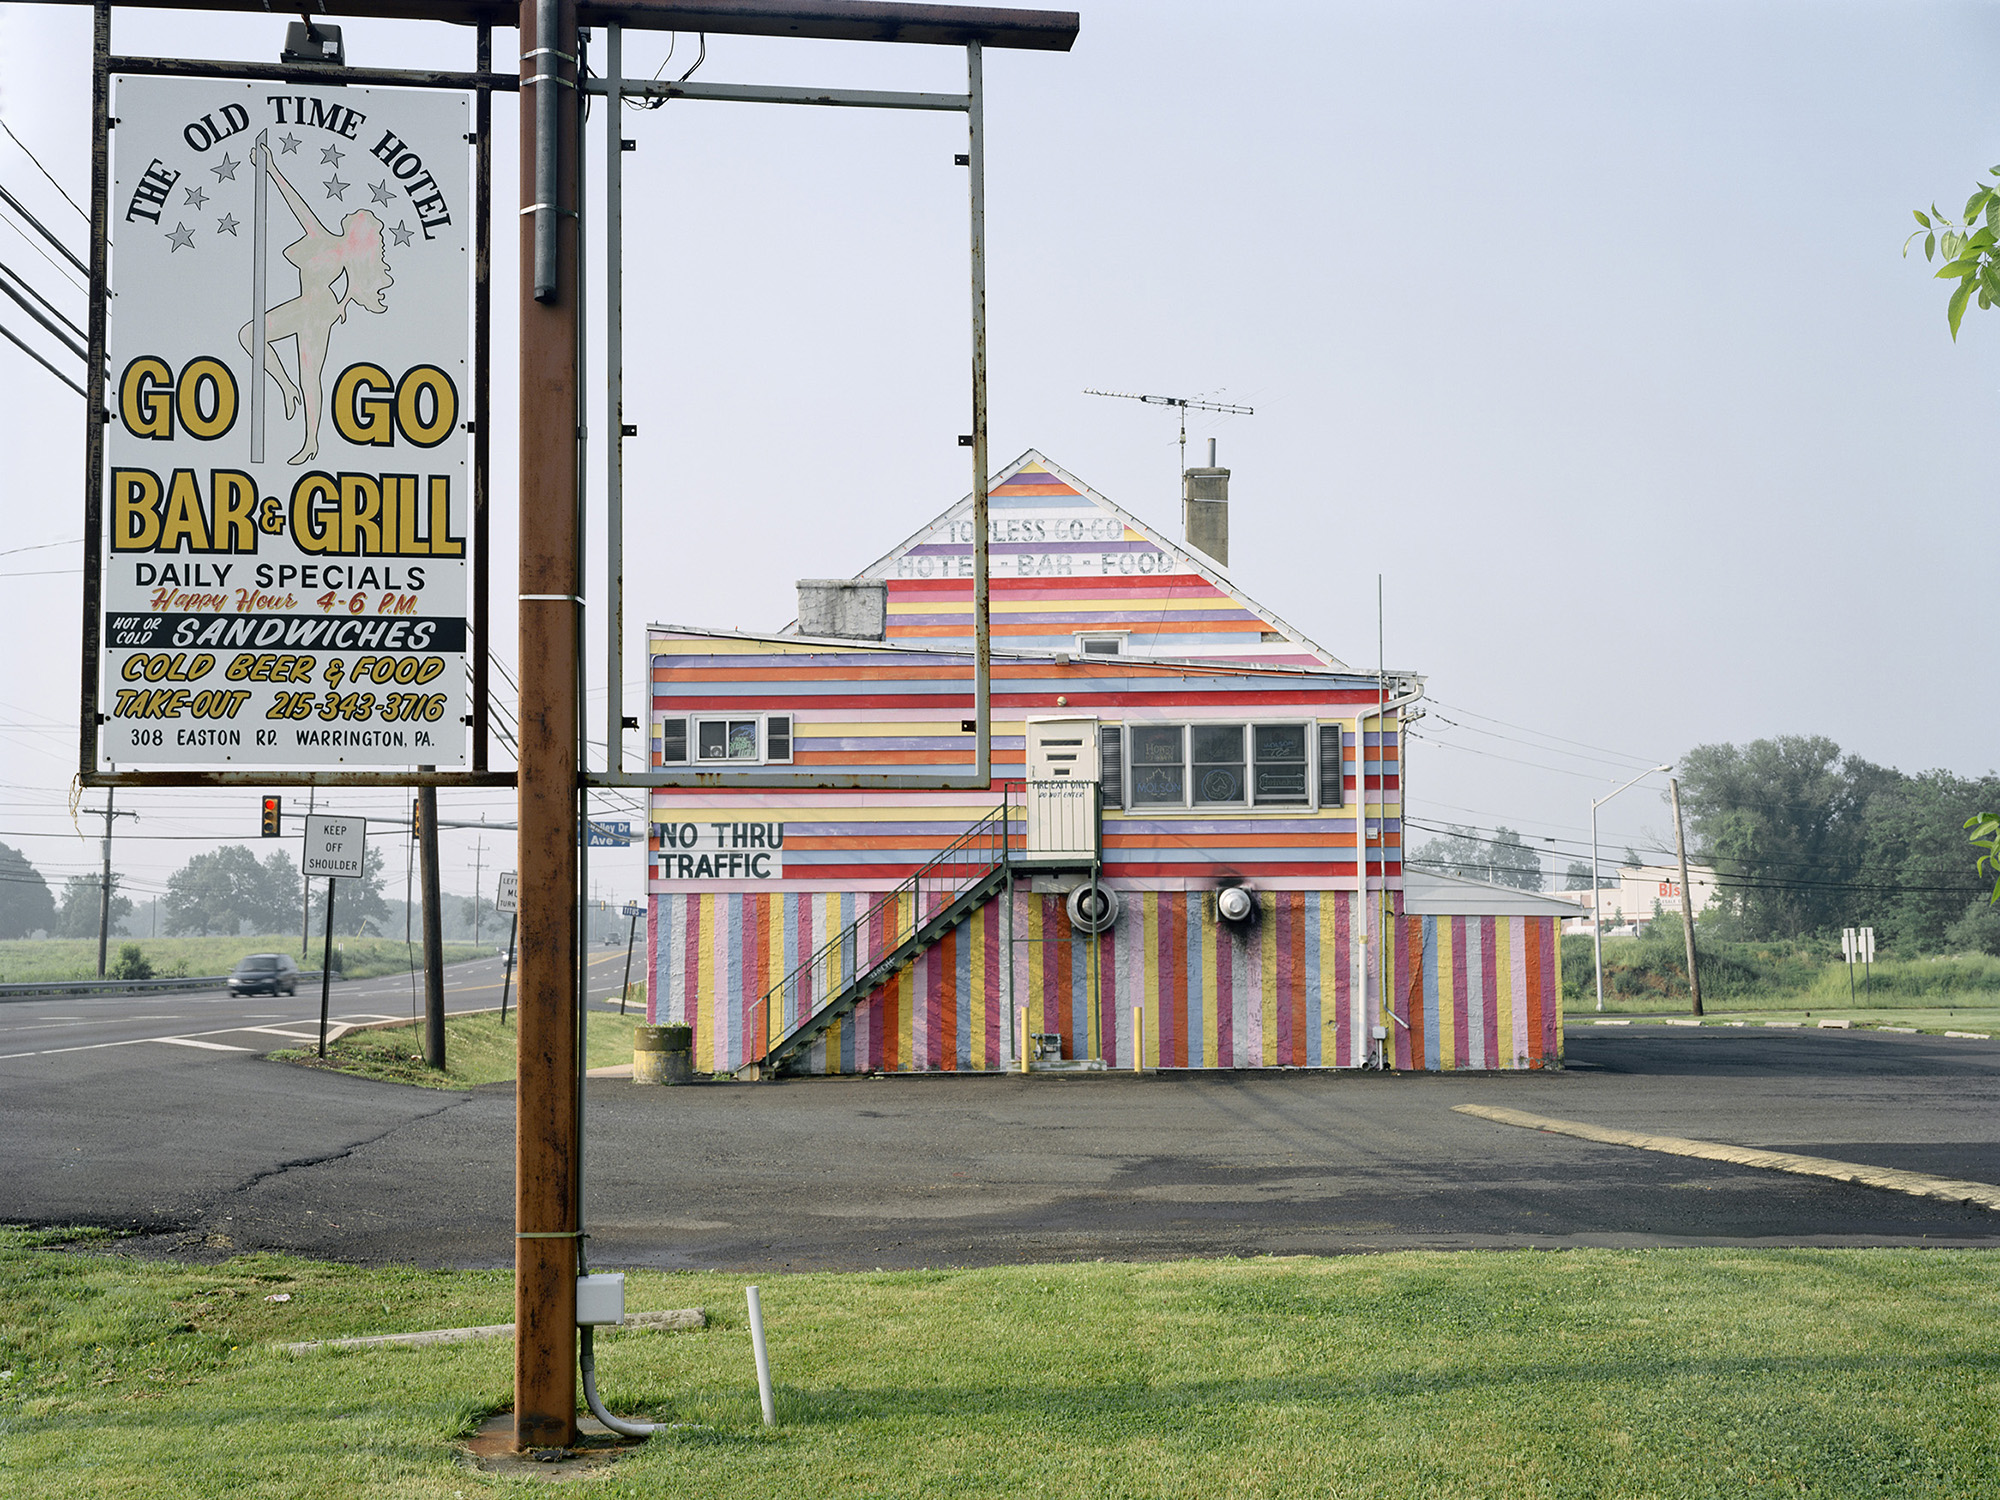 The Old Time Hotel Go-Go Bar and Grill (now demolished), Warrington, PA.